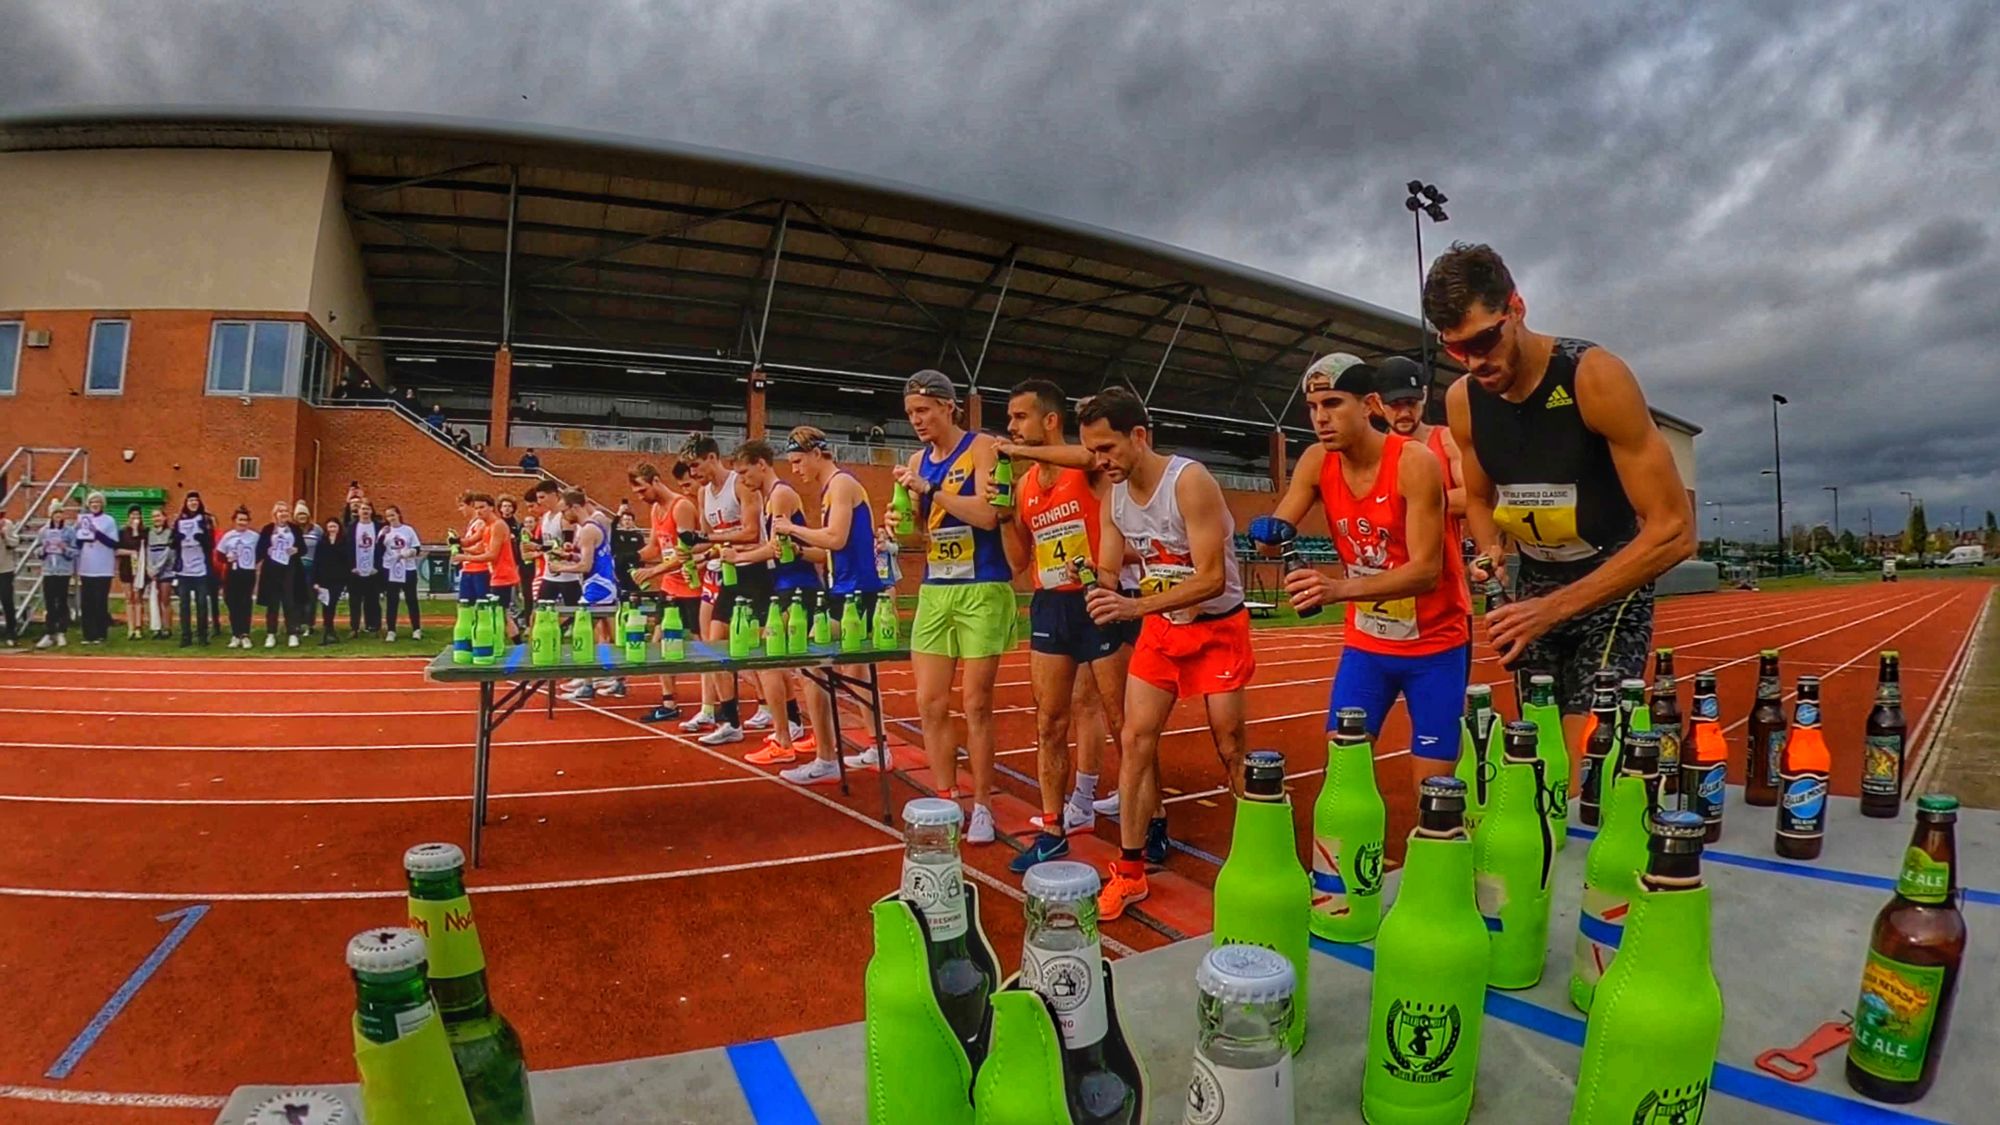 Start of the Men's Championship at the Beer Mile World Classic